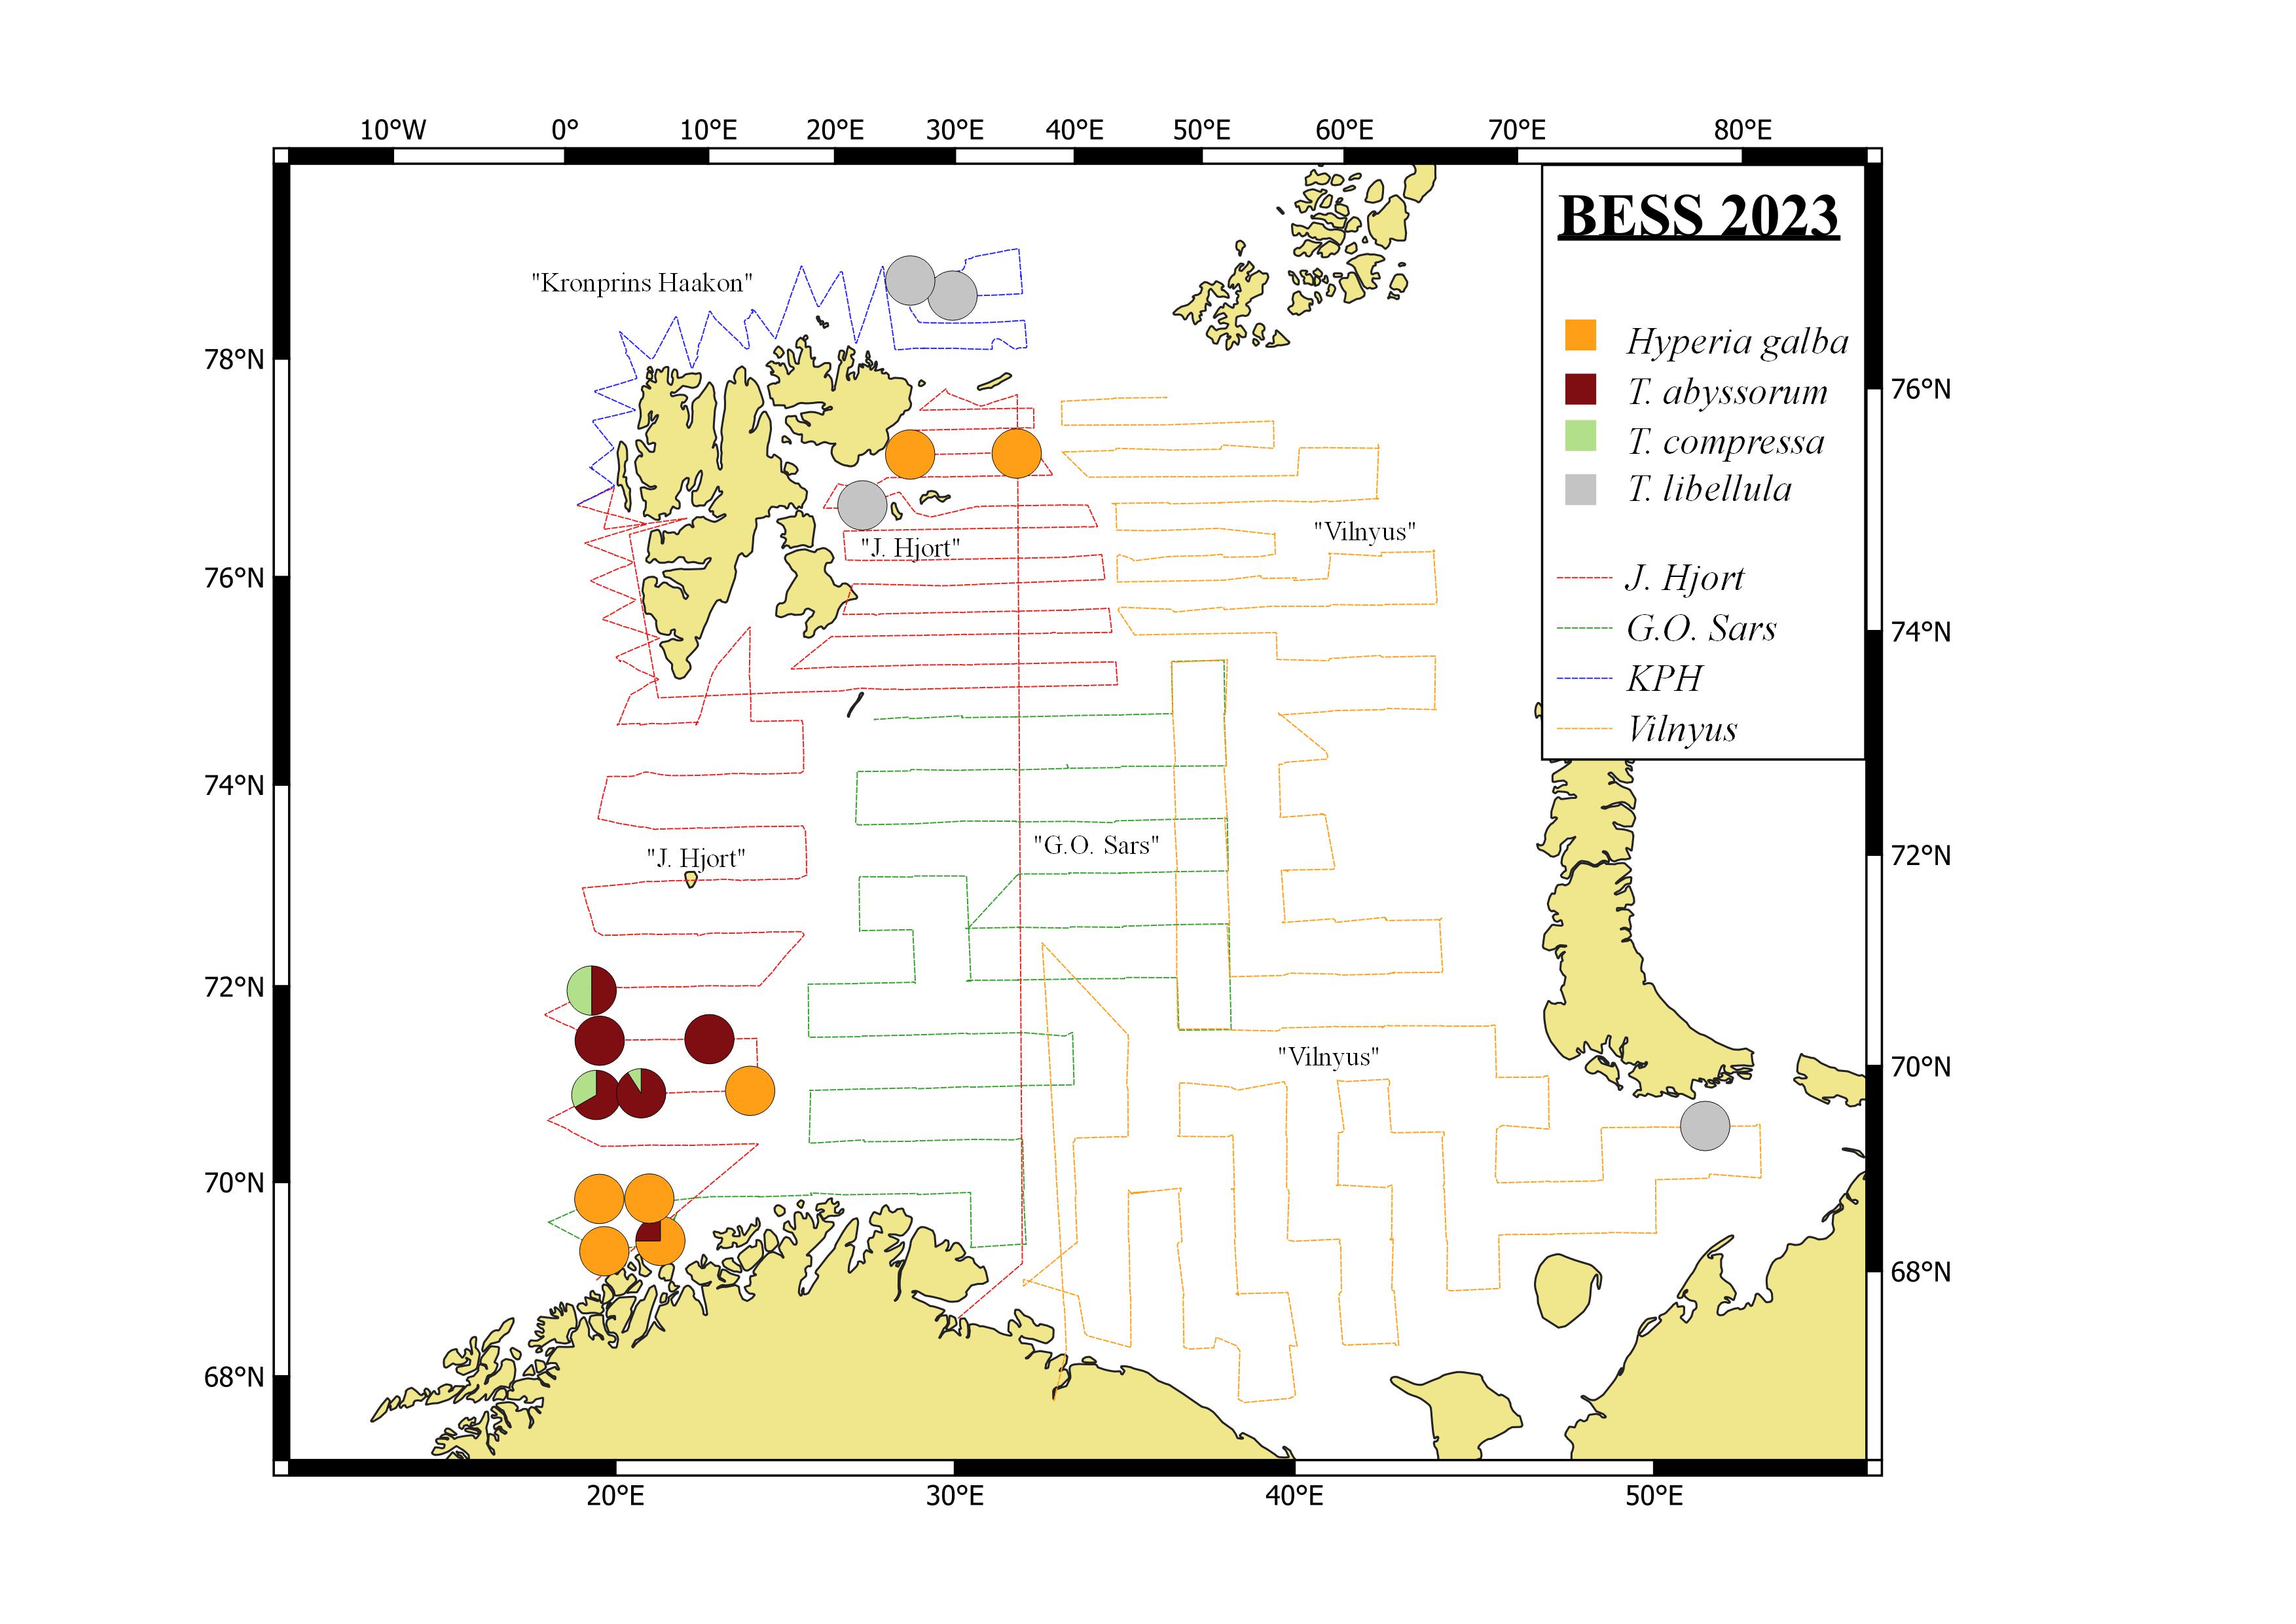 Figure 5.3.2.2. Distribution of pelagic amphipod species, based on pelagic trawl catches covering 0-60m, in the Barents Sea in August-October 2023.